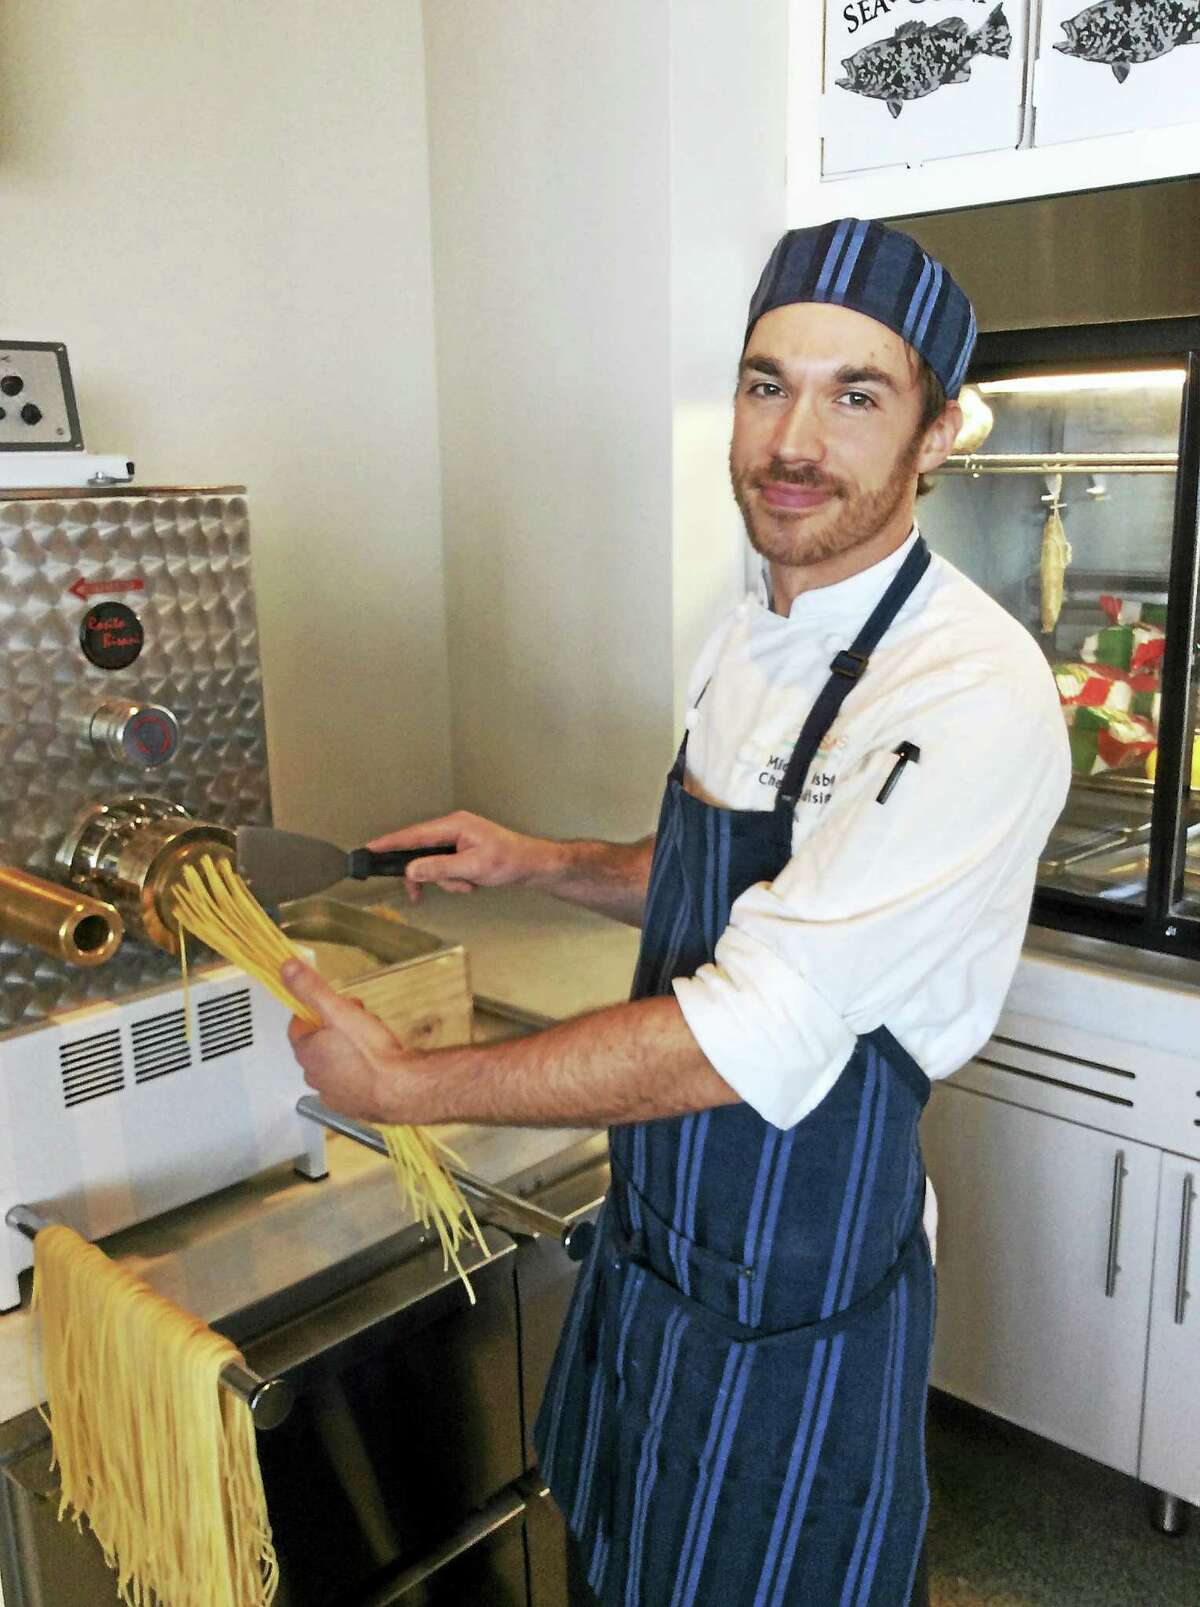 Mike Crosby, chef de cuisine, making the pasta at the Opal Sands Resort.